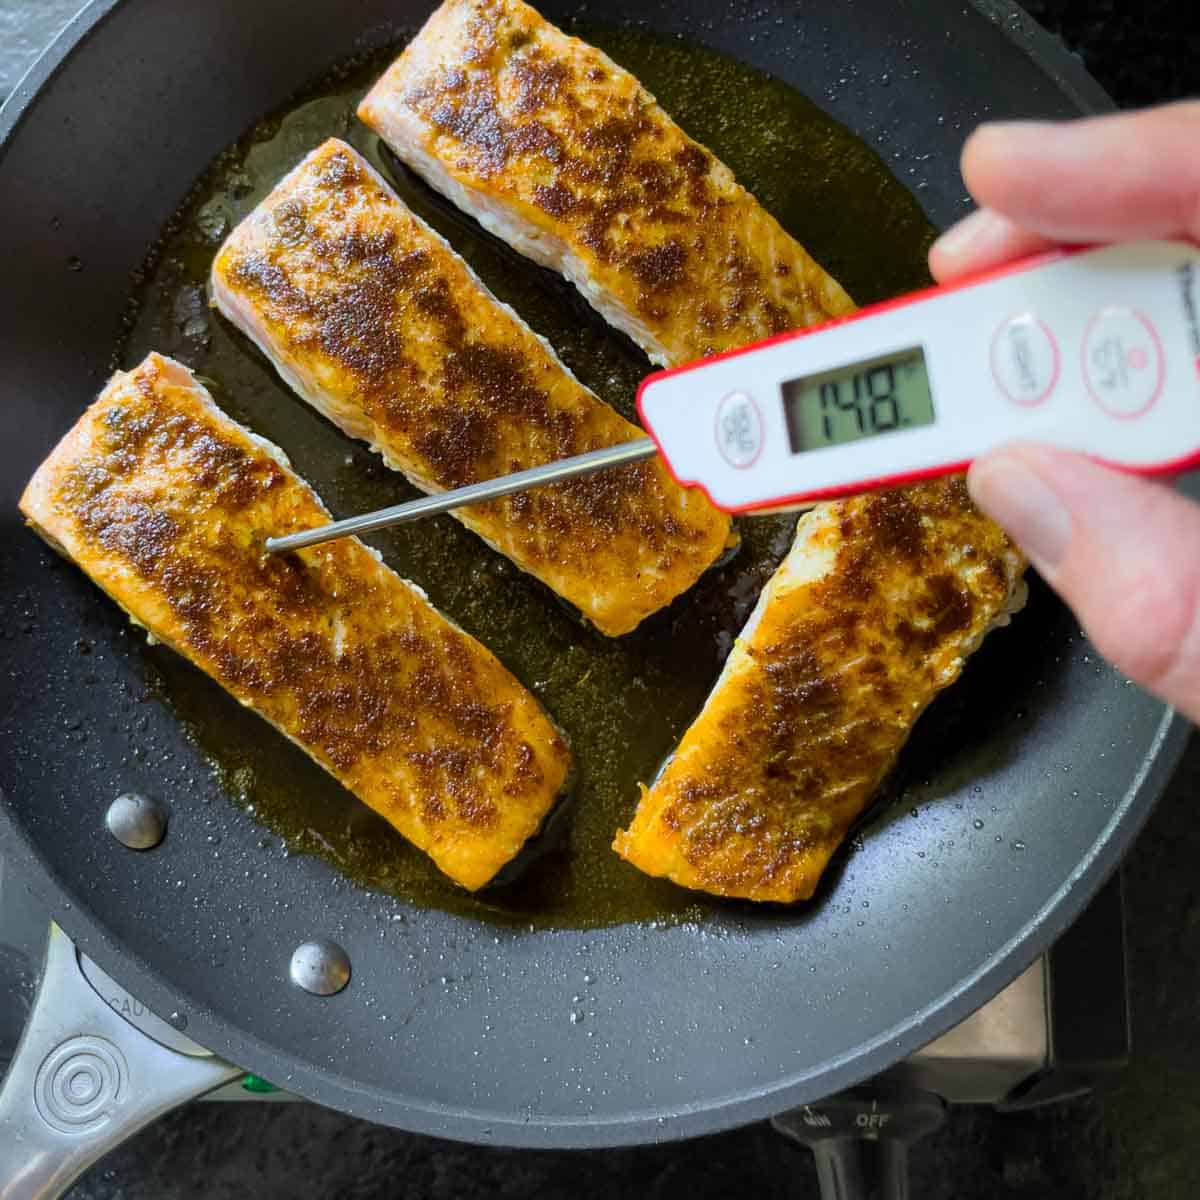 Seasoned fillets in a skillet with a meat thermometer temping one of them at 148 degrees.